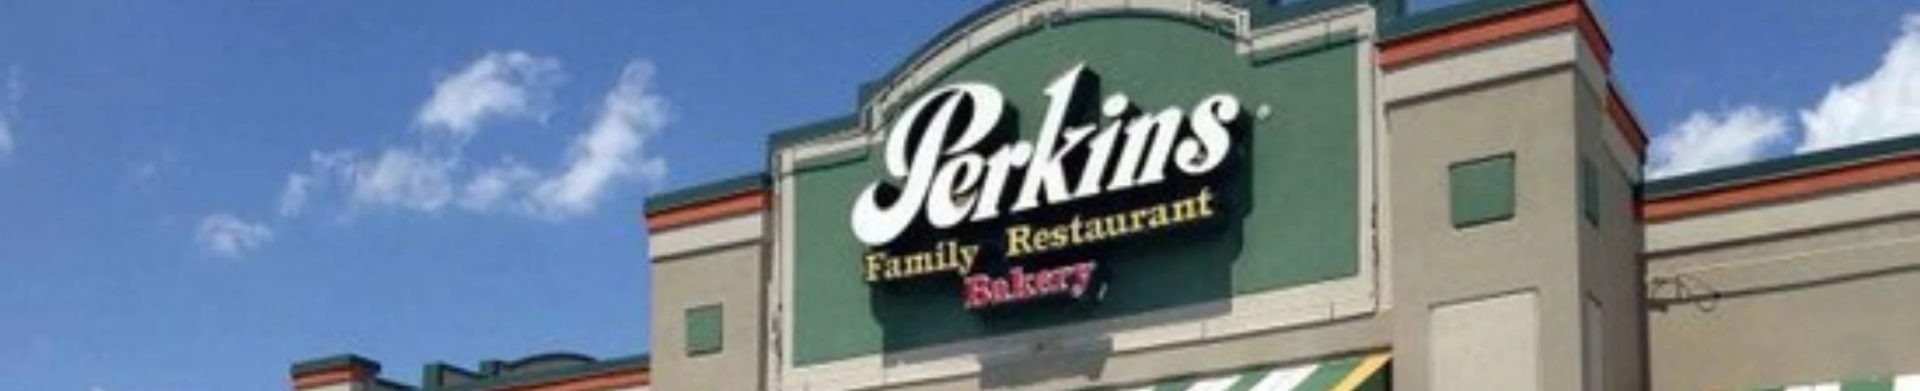 Perkins storefront in the daytime